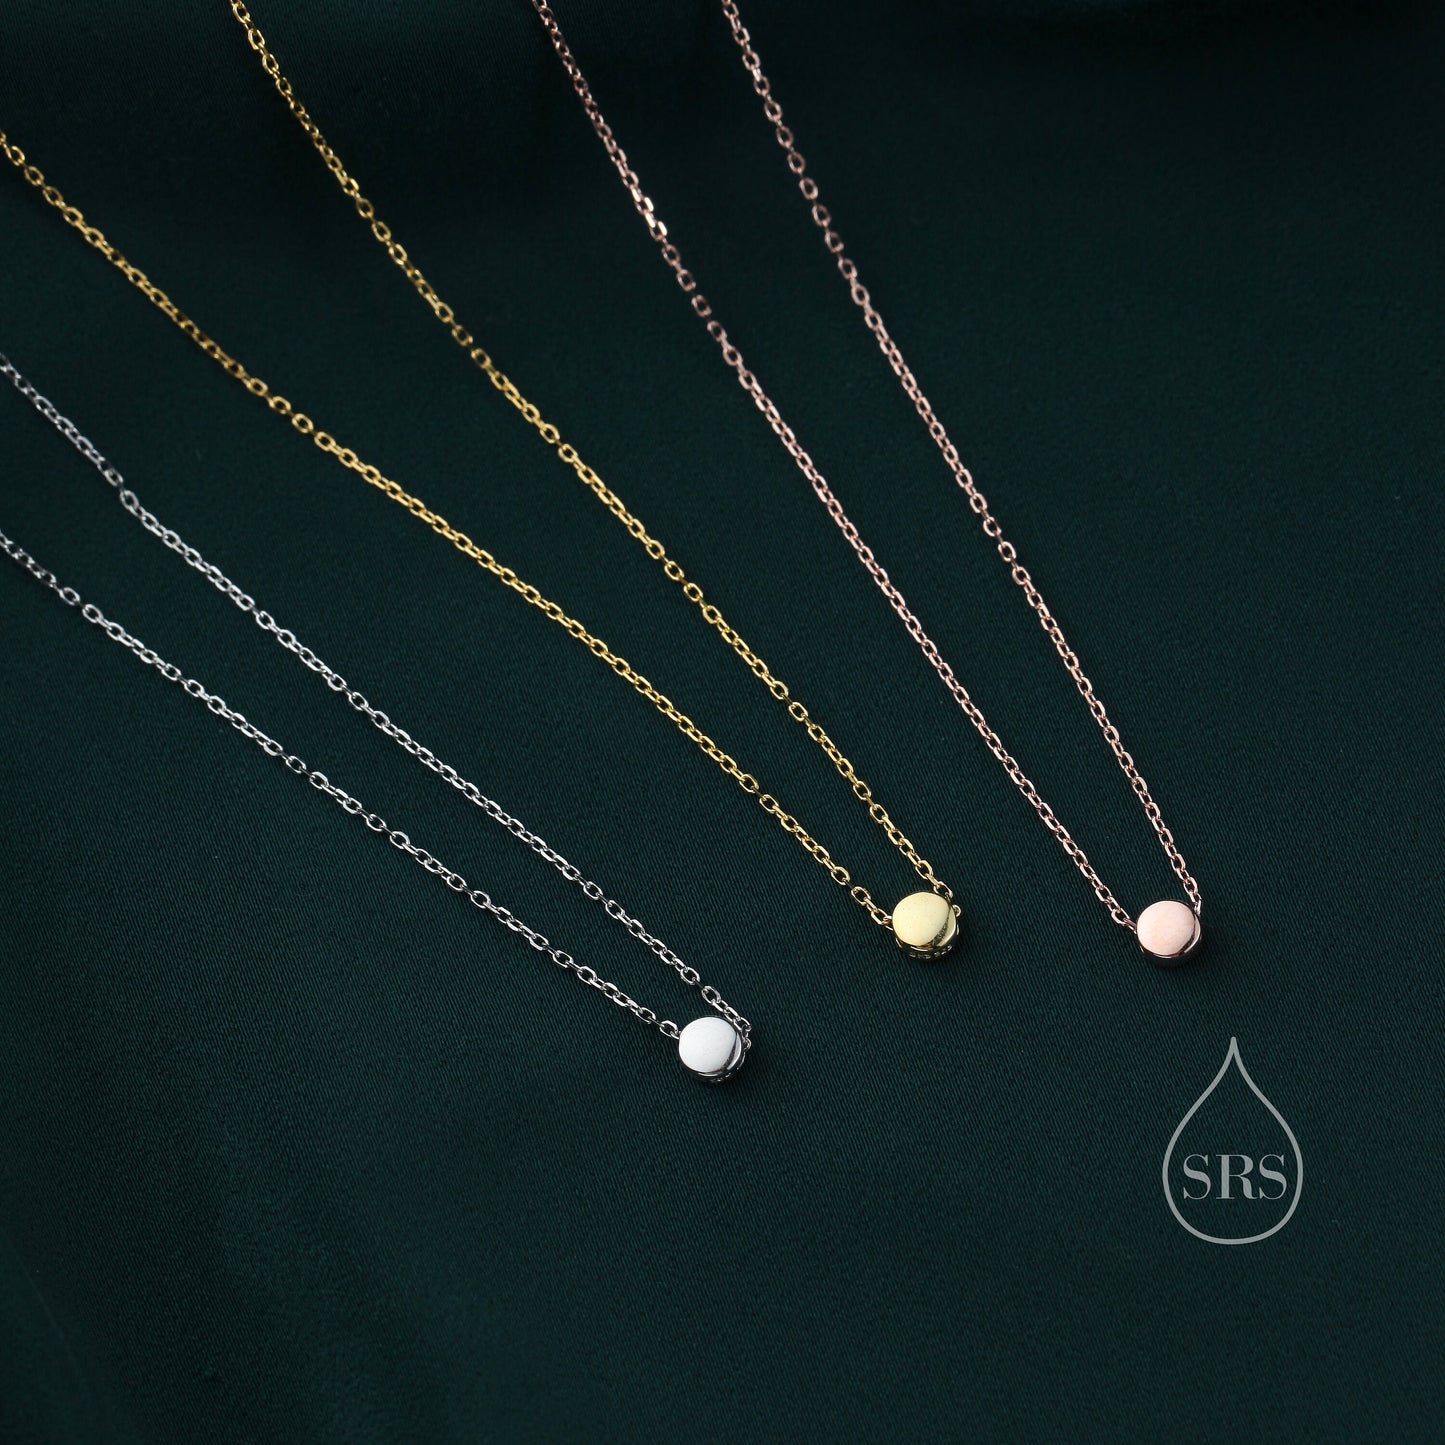 Tiny Little Dot Pendant Necklace in Sterling Silver, Silver, Gold or Rose Gold, Extra Small Pebble Necklace, Silver Disk Necklace